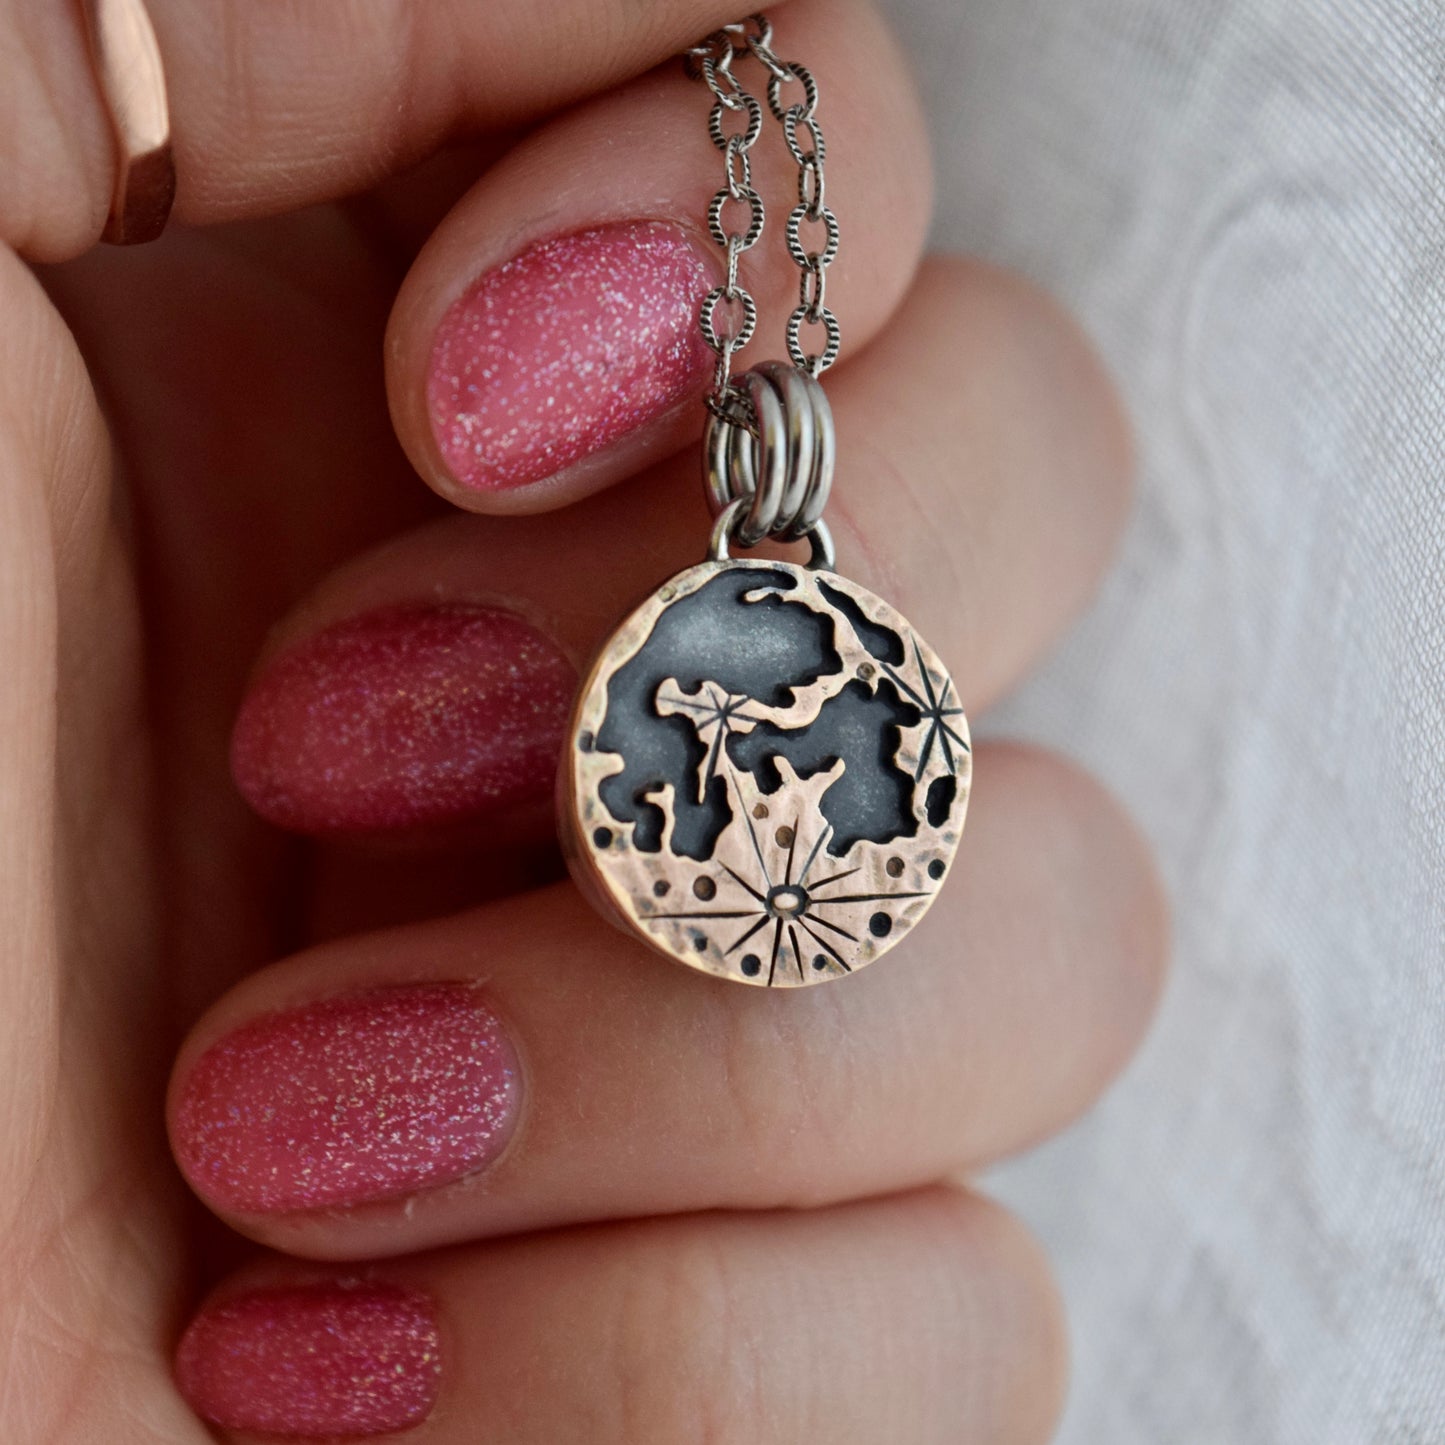 Double Sided Cherry Blossom Lunar Phase Pendant with Morganite and Rose Gold Fill